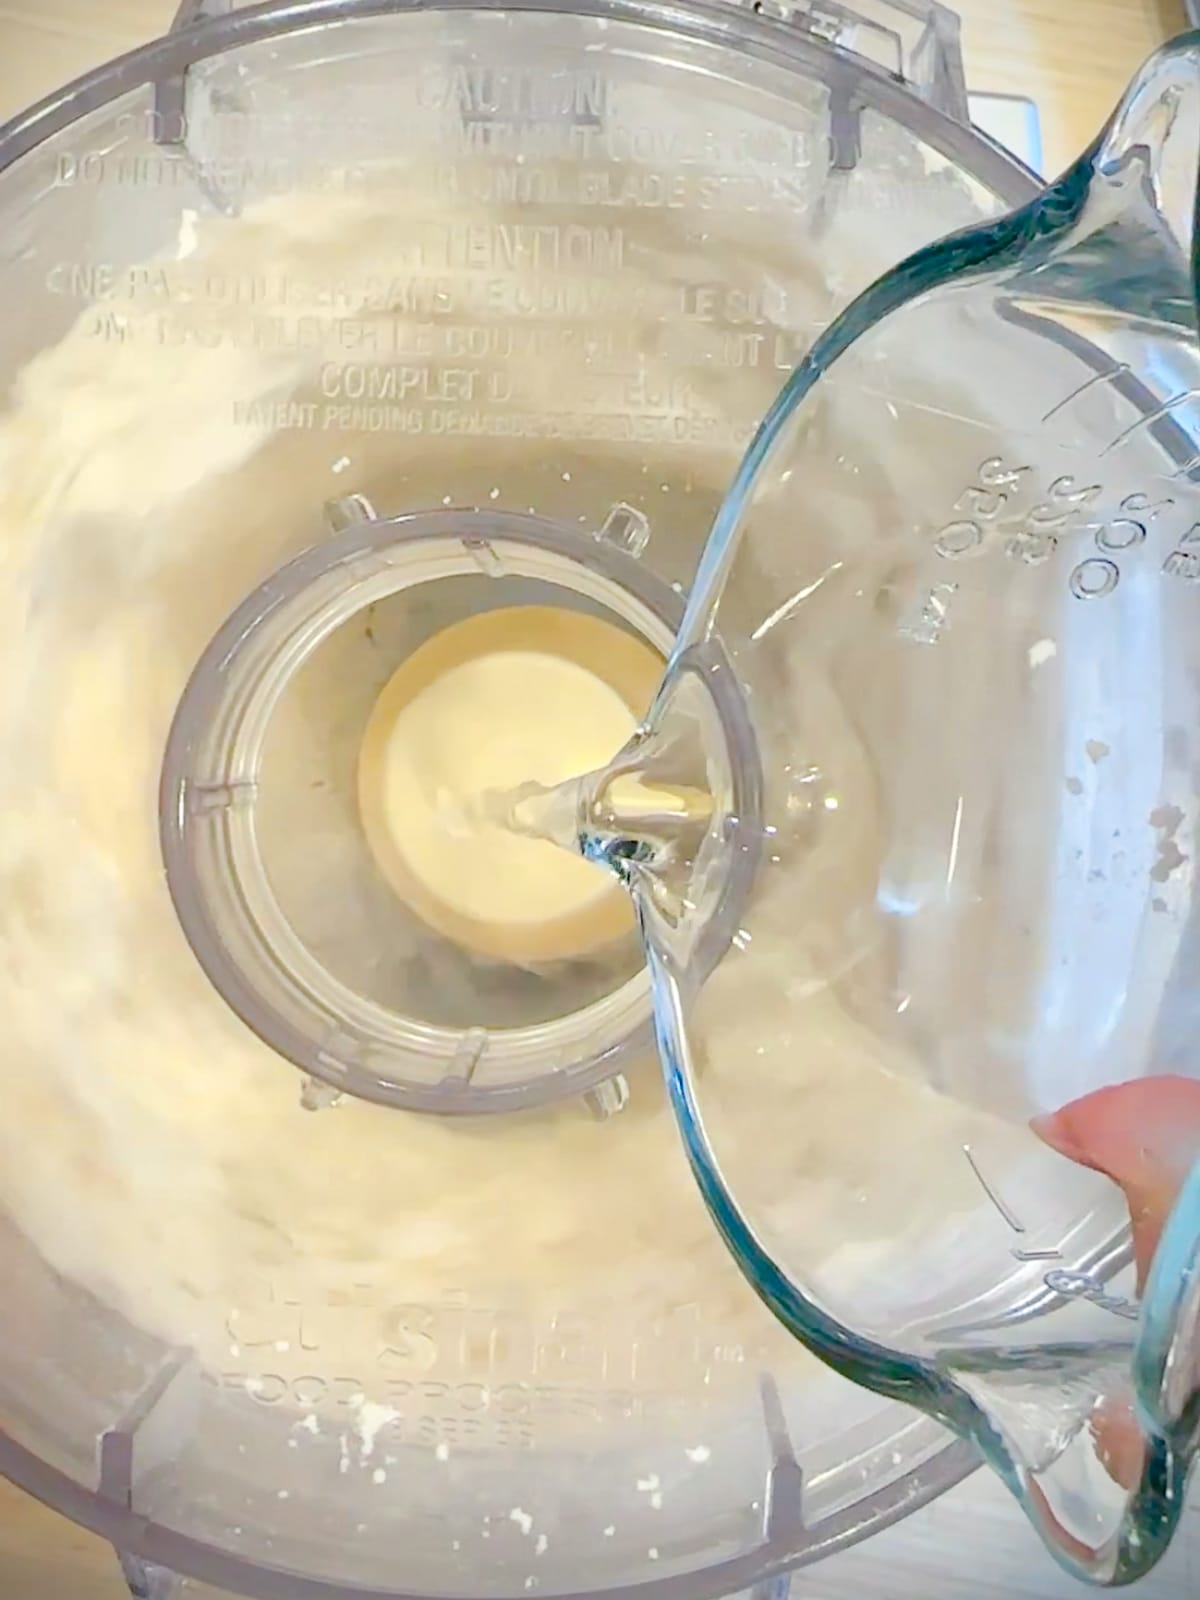 Pouring water into a food processor to make pie dough.